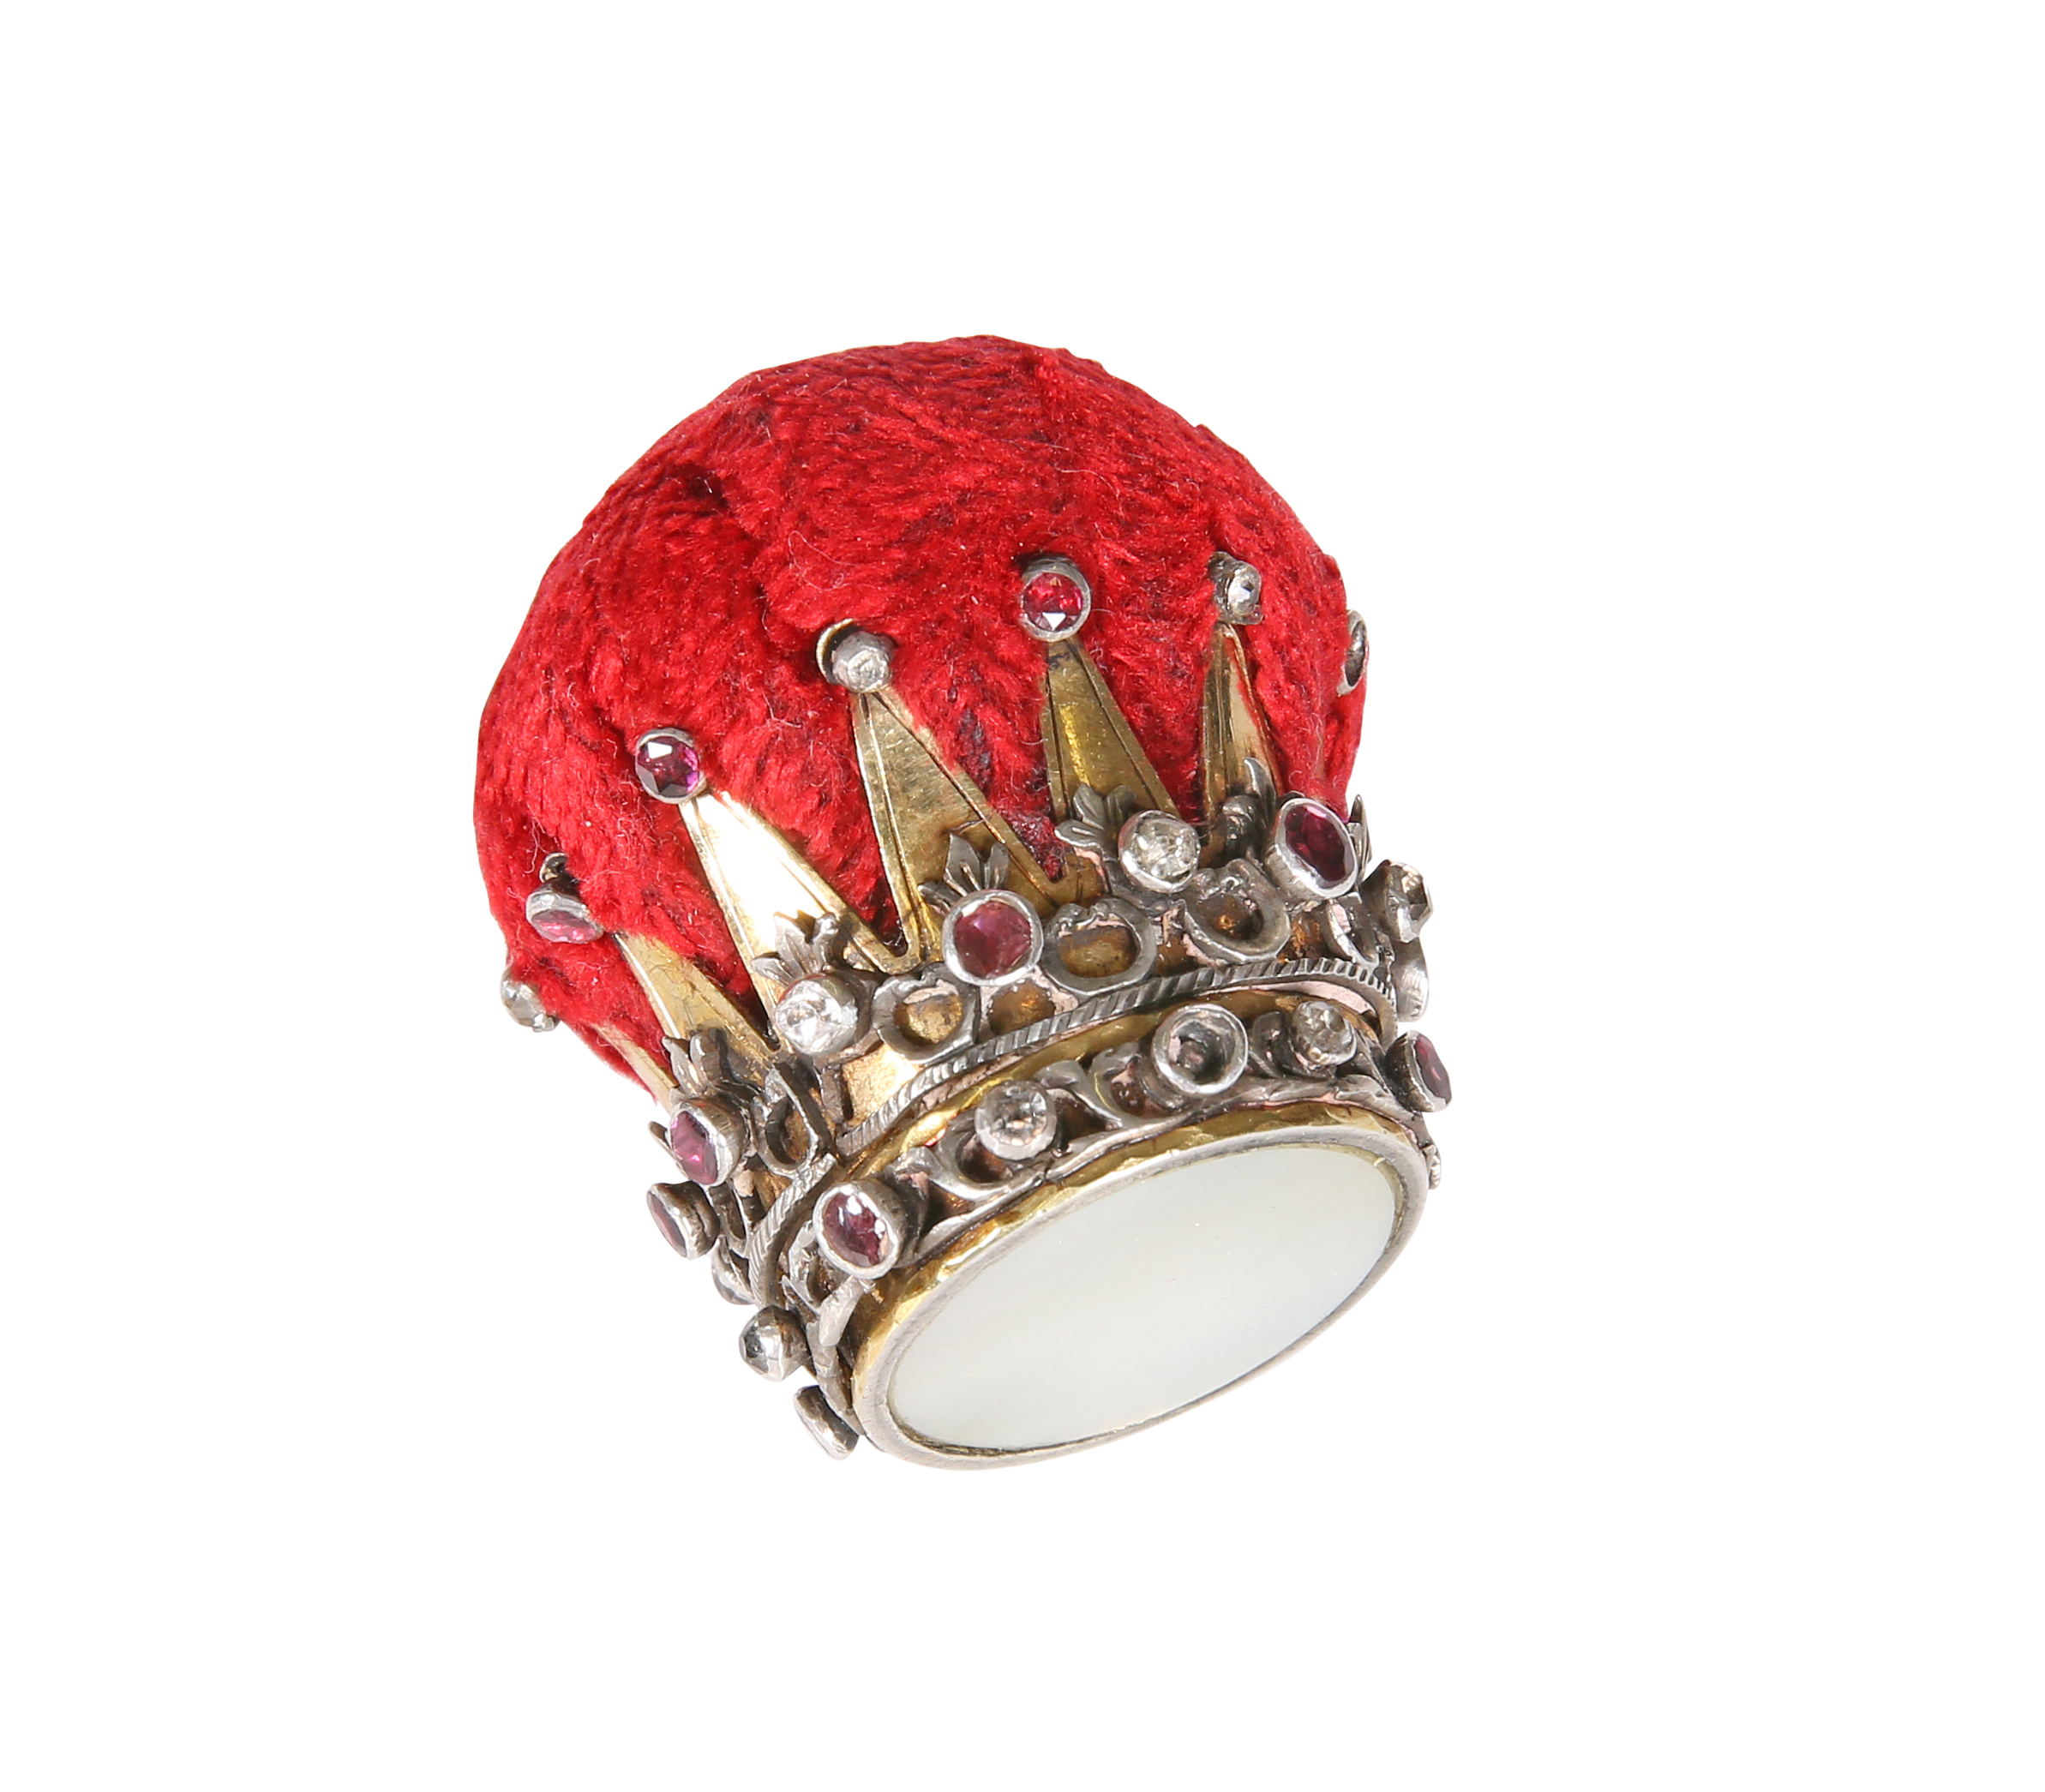 A LATE 19TH CENTURY NOVELTY CROWN FORM PIN CUSHION